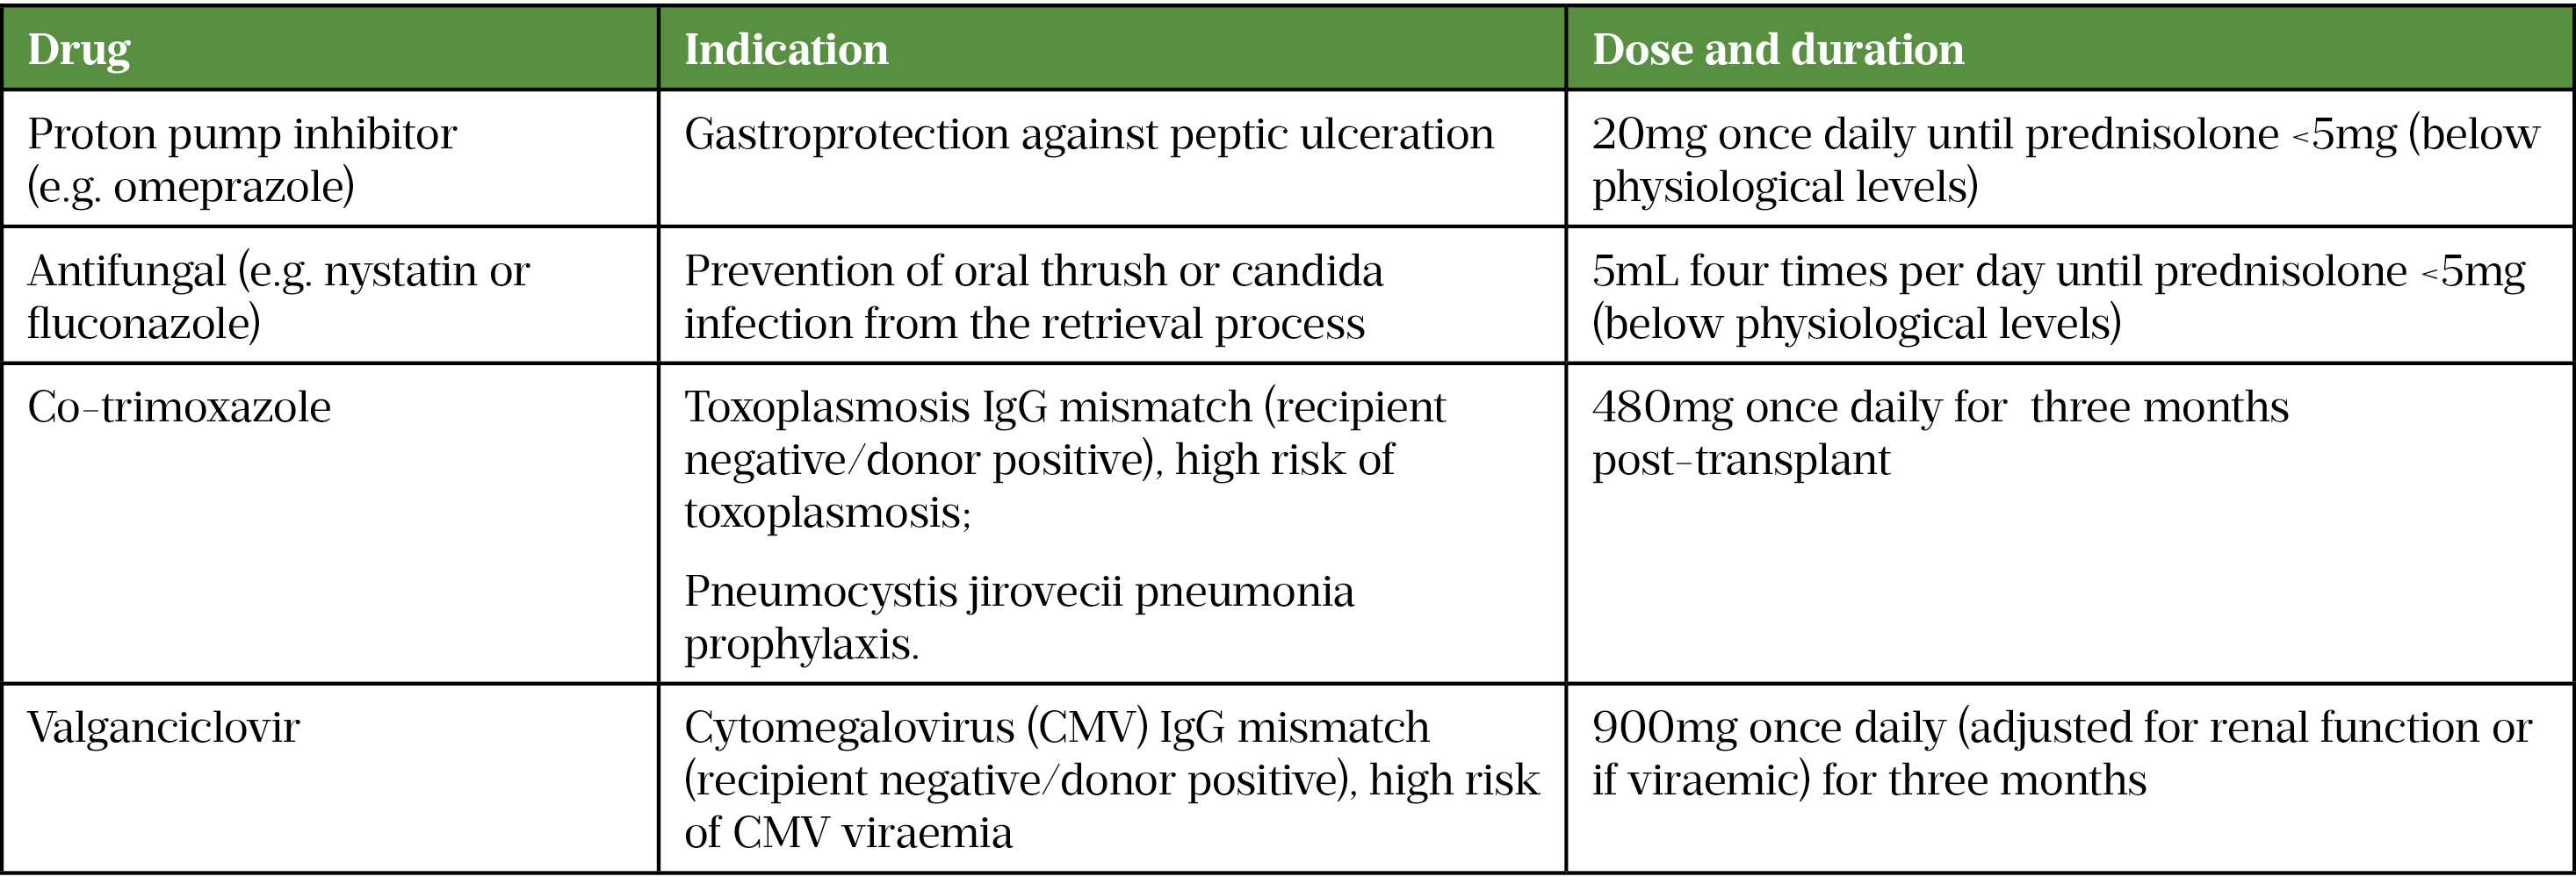 Table 3: Commonly co-administered medications immediately post transplant.